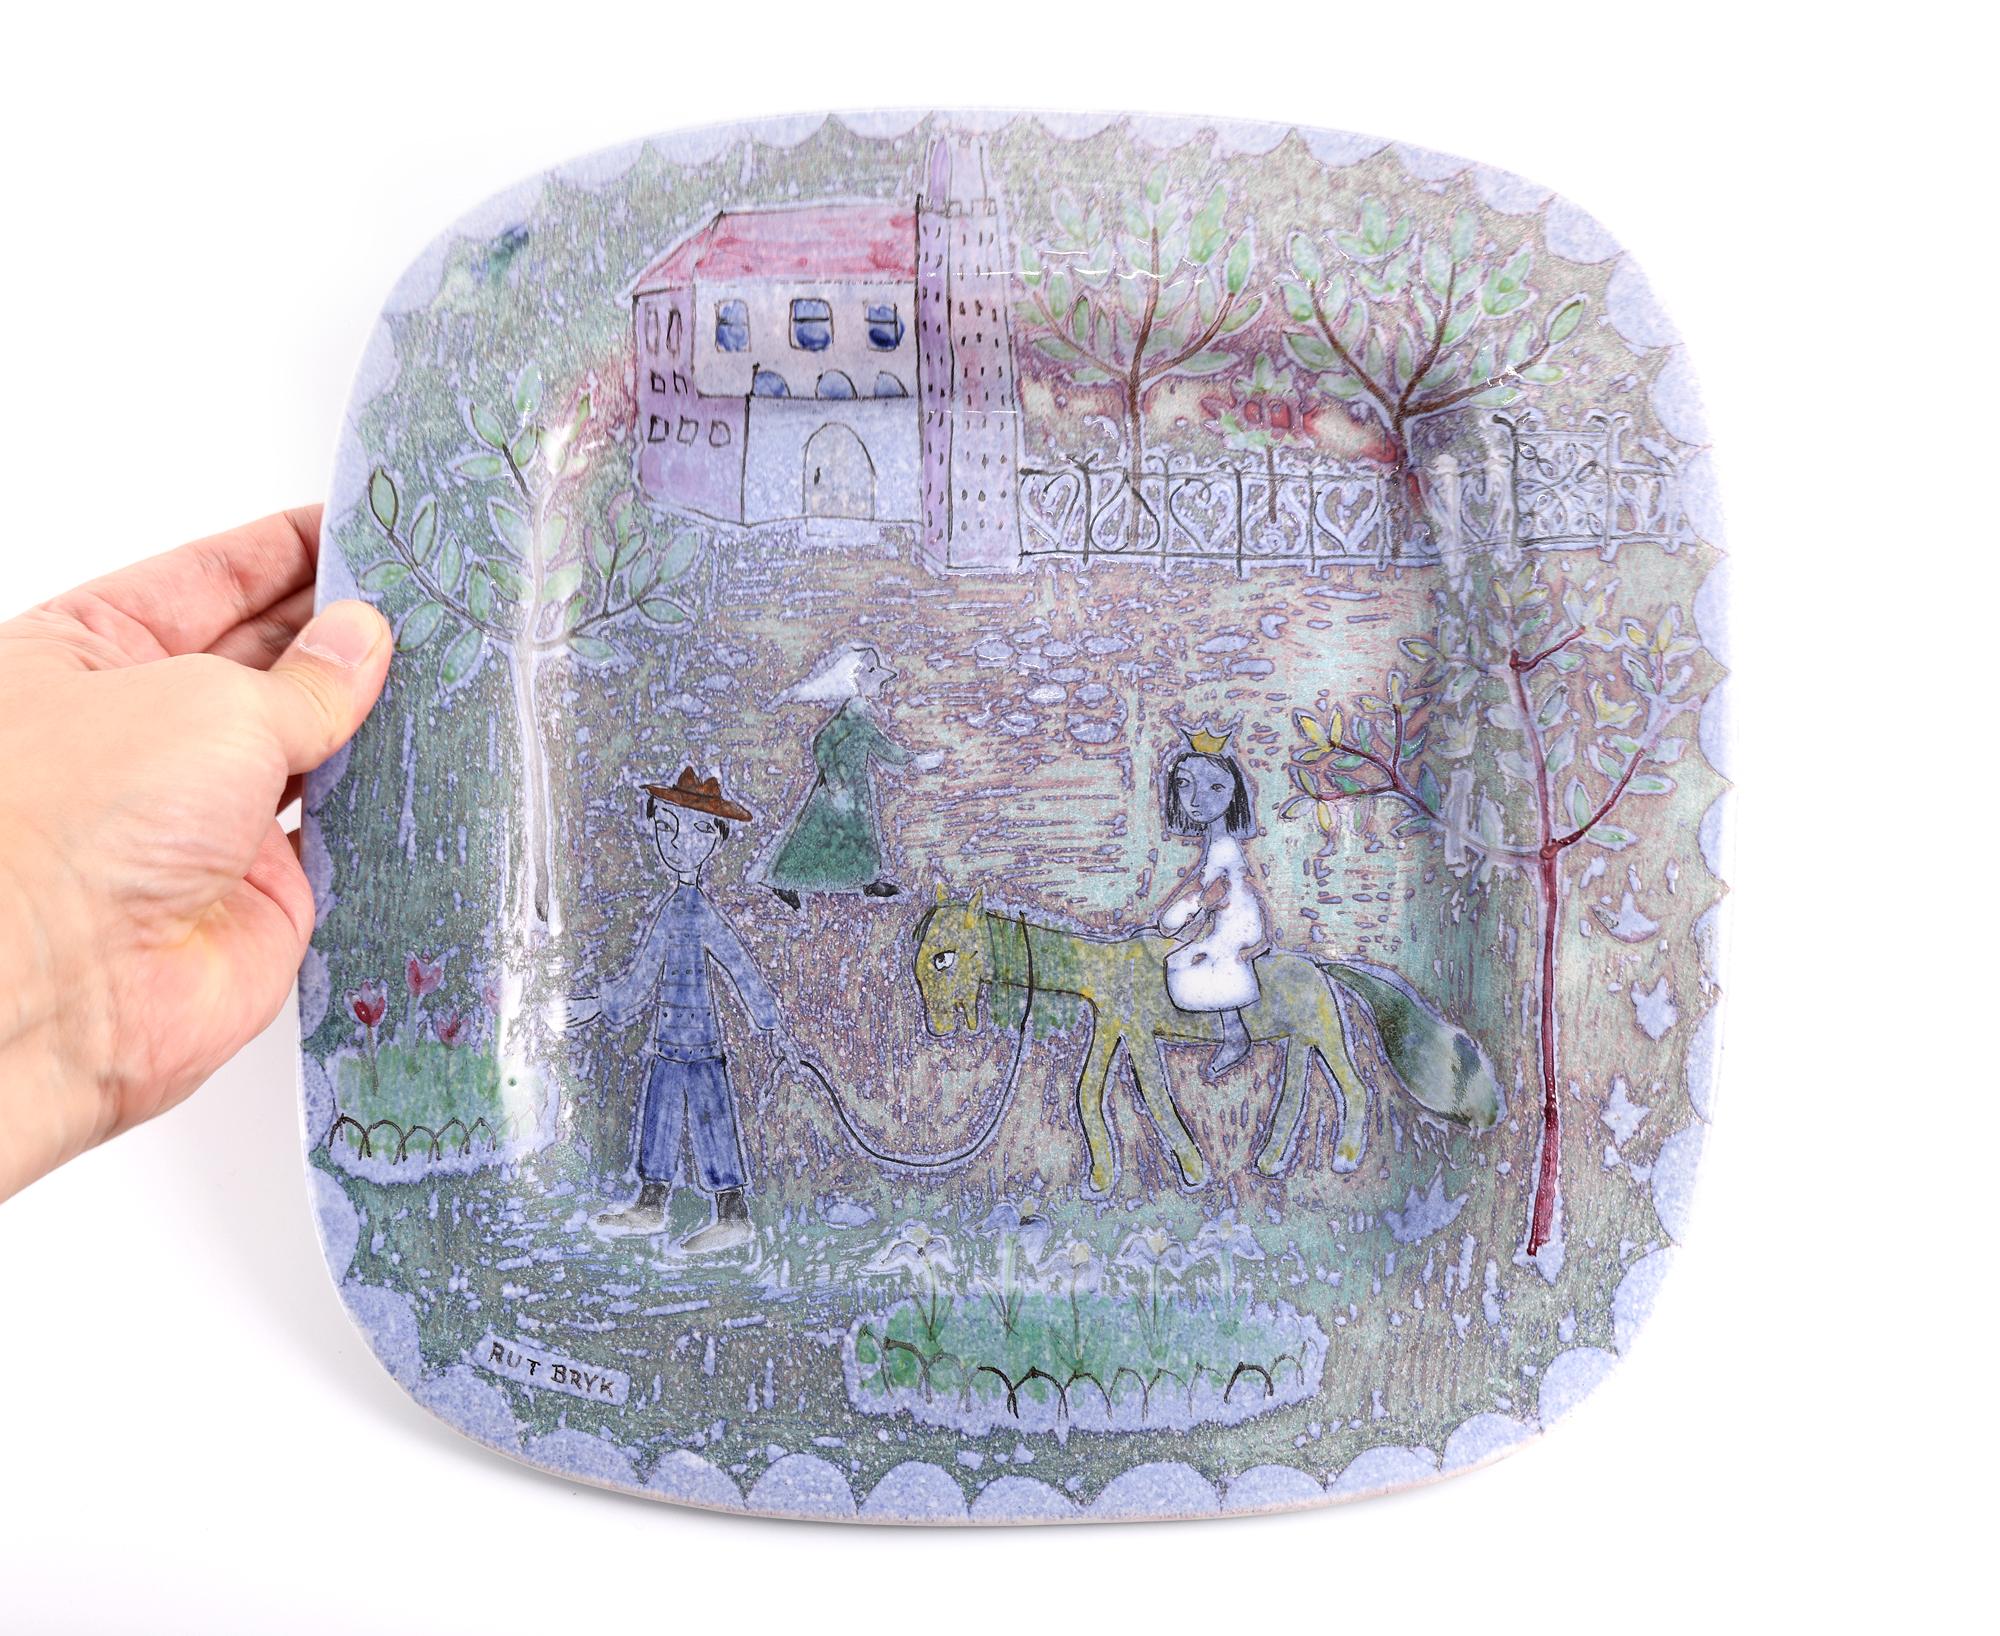 20th Century Rut Bryk, Stoneware Dish with Scraped-Off Paintings, Arabia, Finland 1940's For Sale